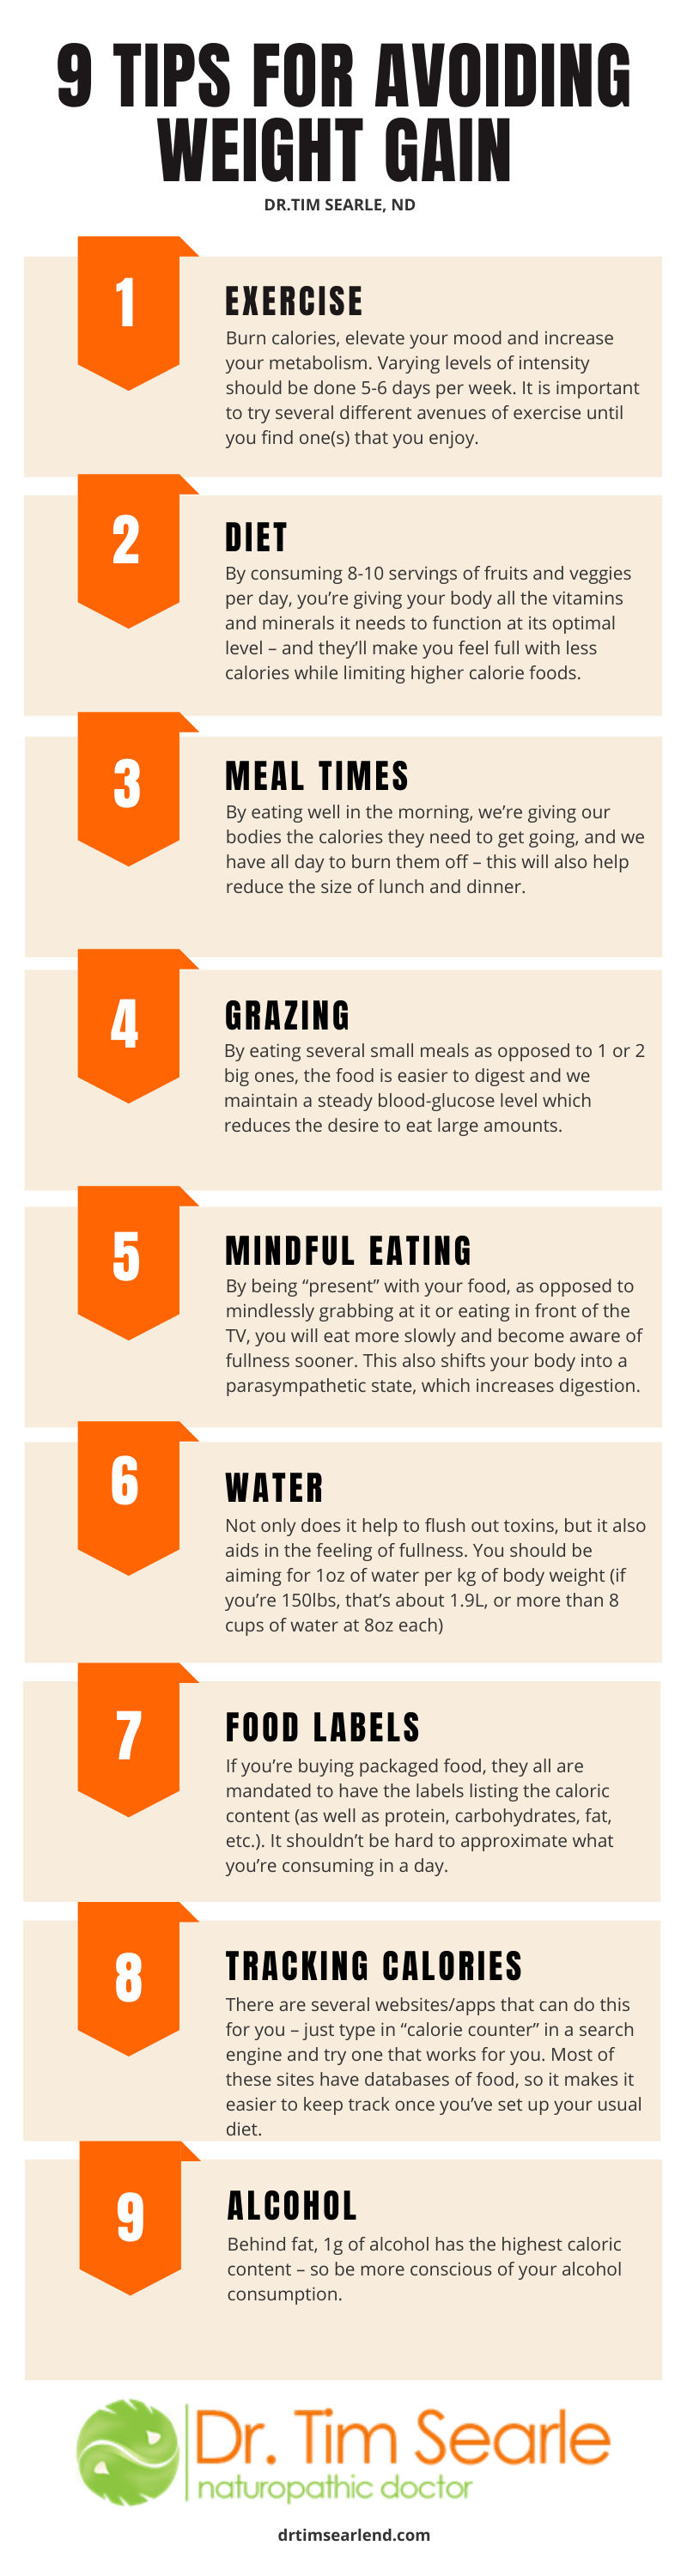 9 tips to avoid weight gain